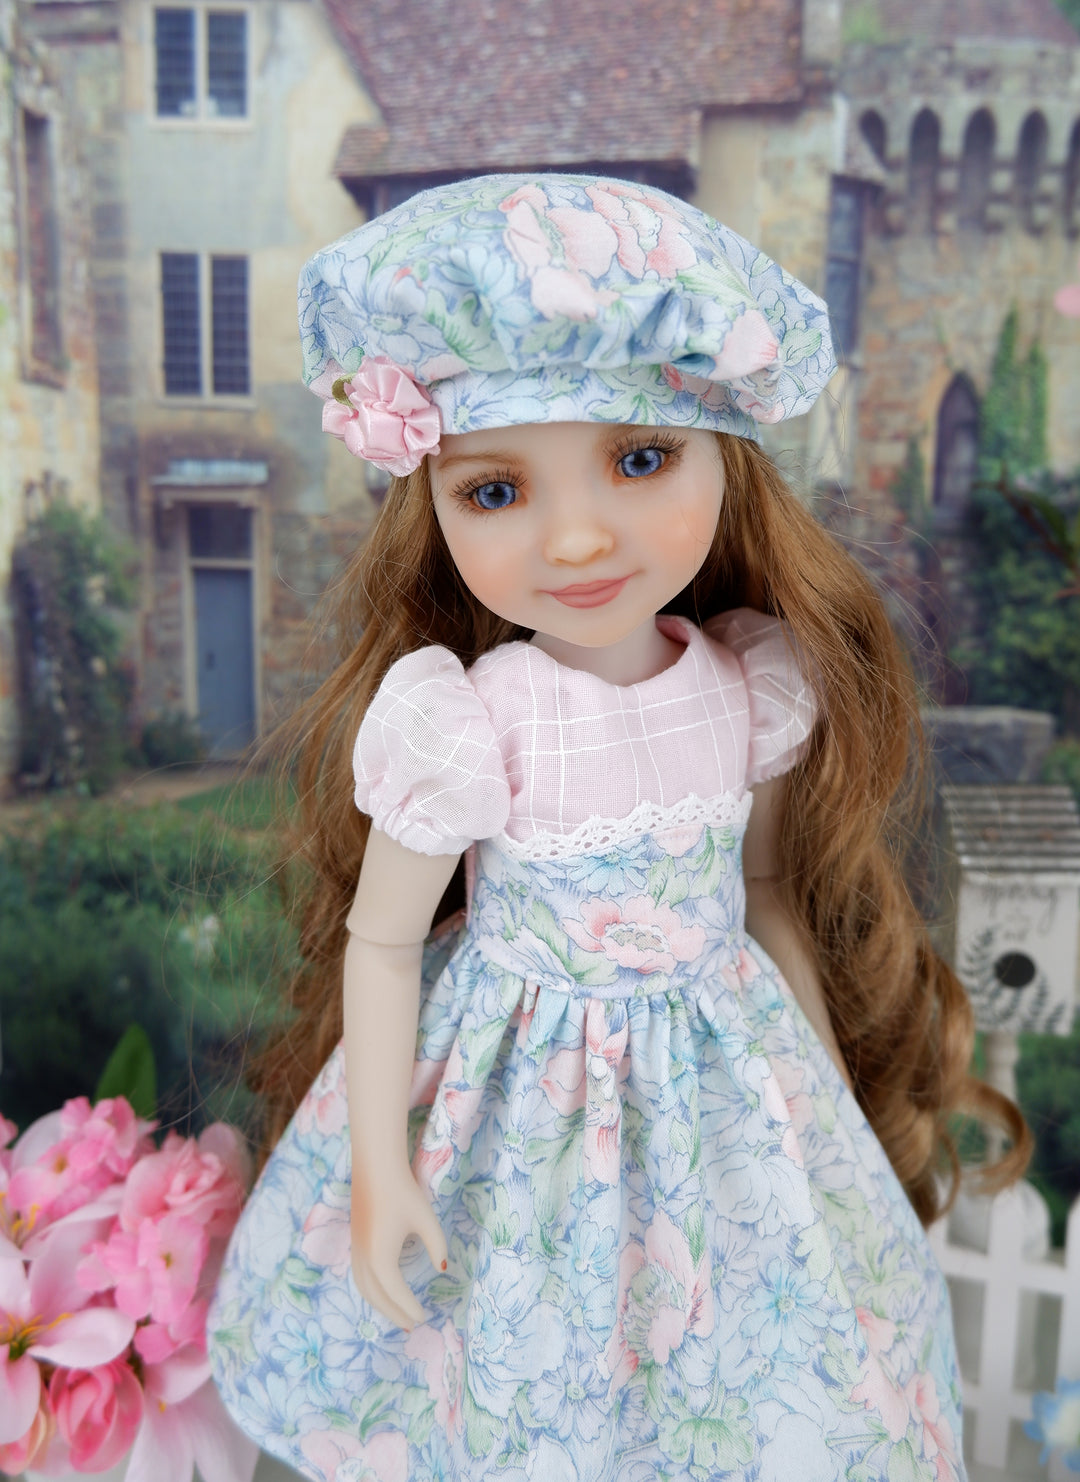 Watercolor Florals - dress and shoes for Ruby Red Fashion Friends doll